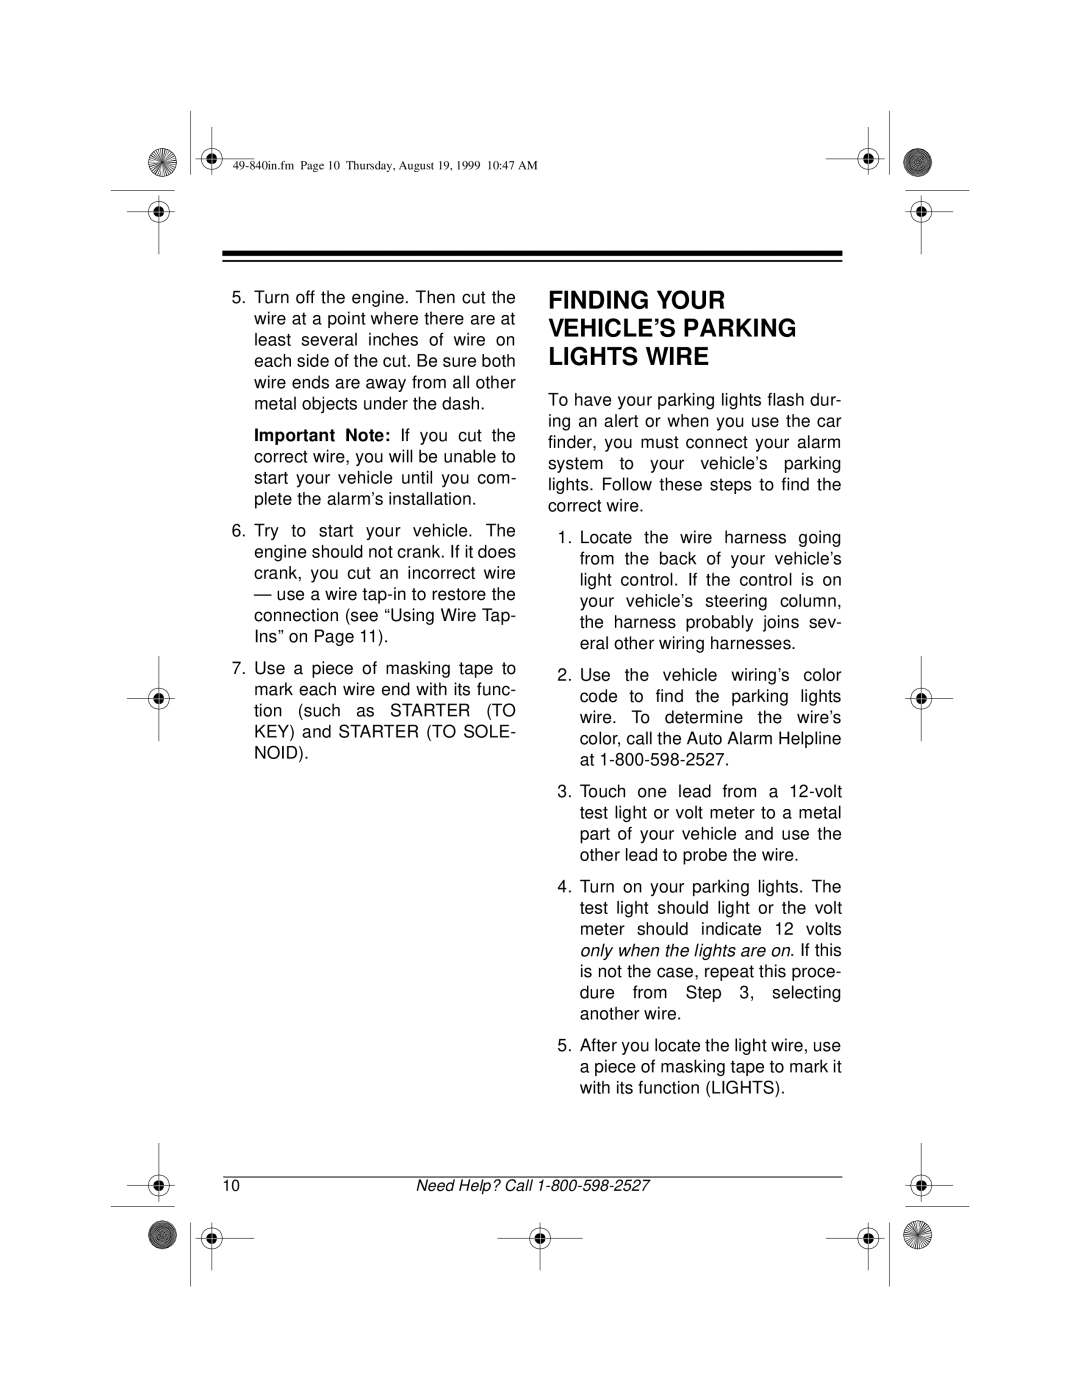 Radio Shack RS-4000 installation manual Finding Your Vehicle’S Parking Lights Wire 